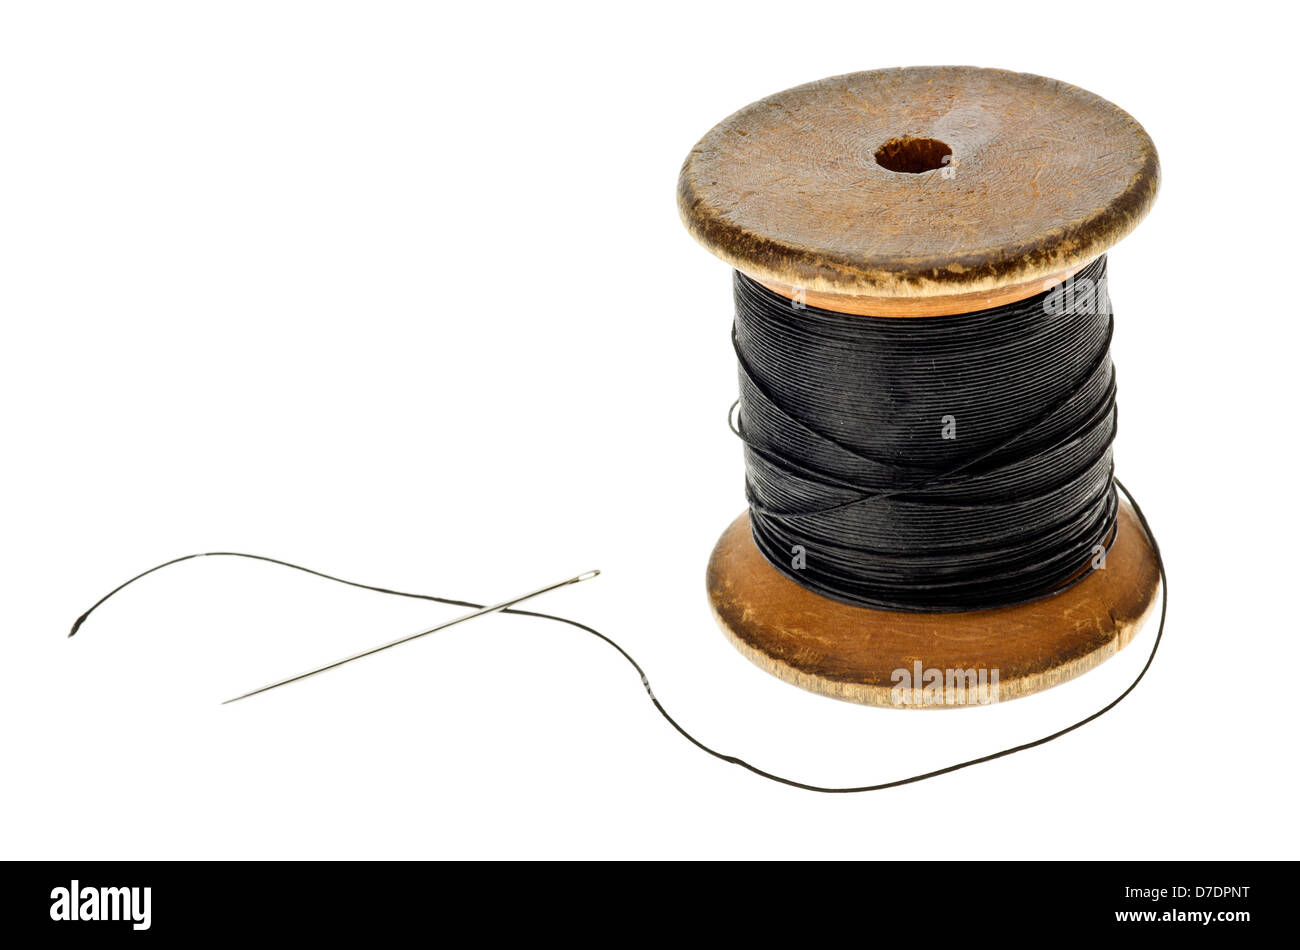 Cotton Reel with Sewing Needle Stock Photo - Alamy